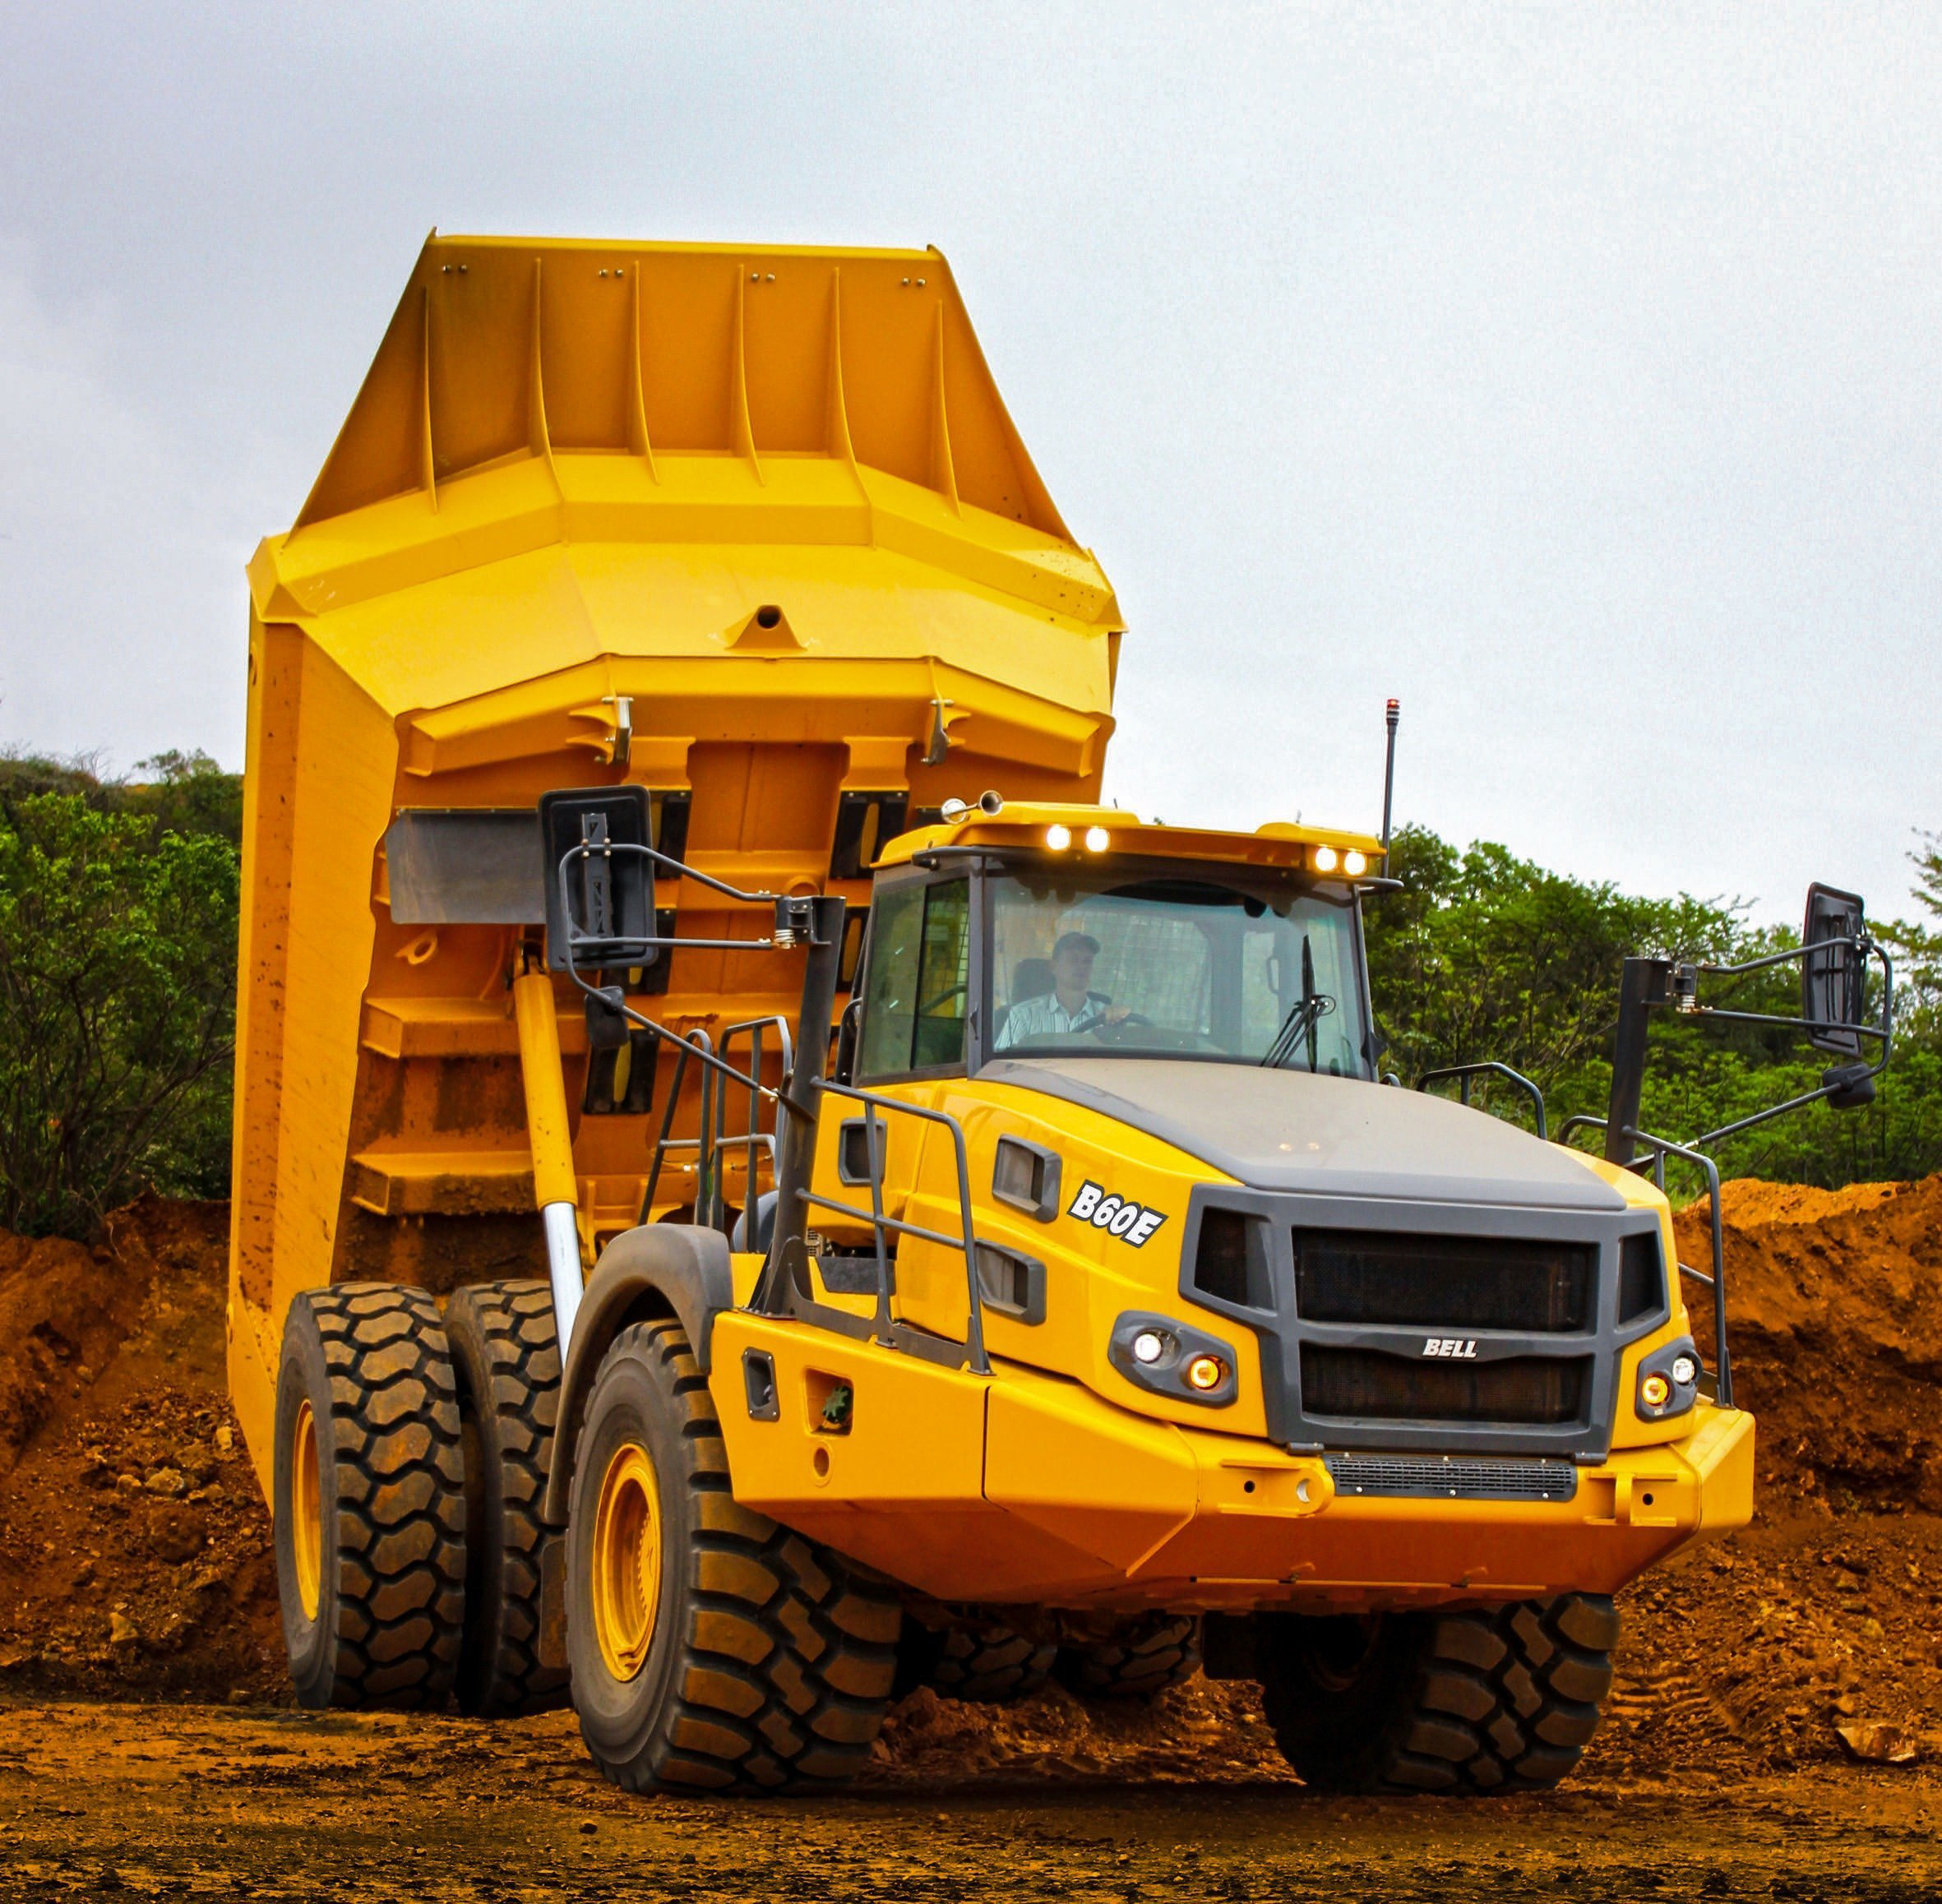 Short on the heels of Volvo’s unveiling of their 60-ton articulated dump tr...